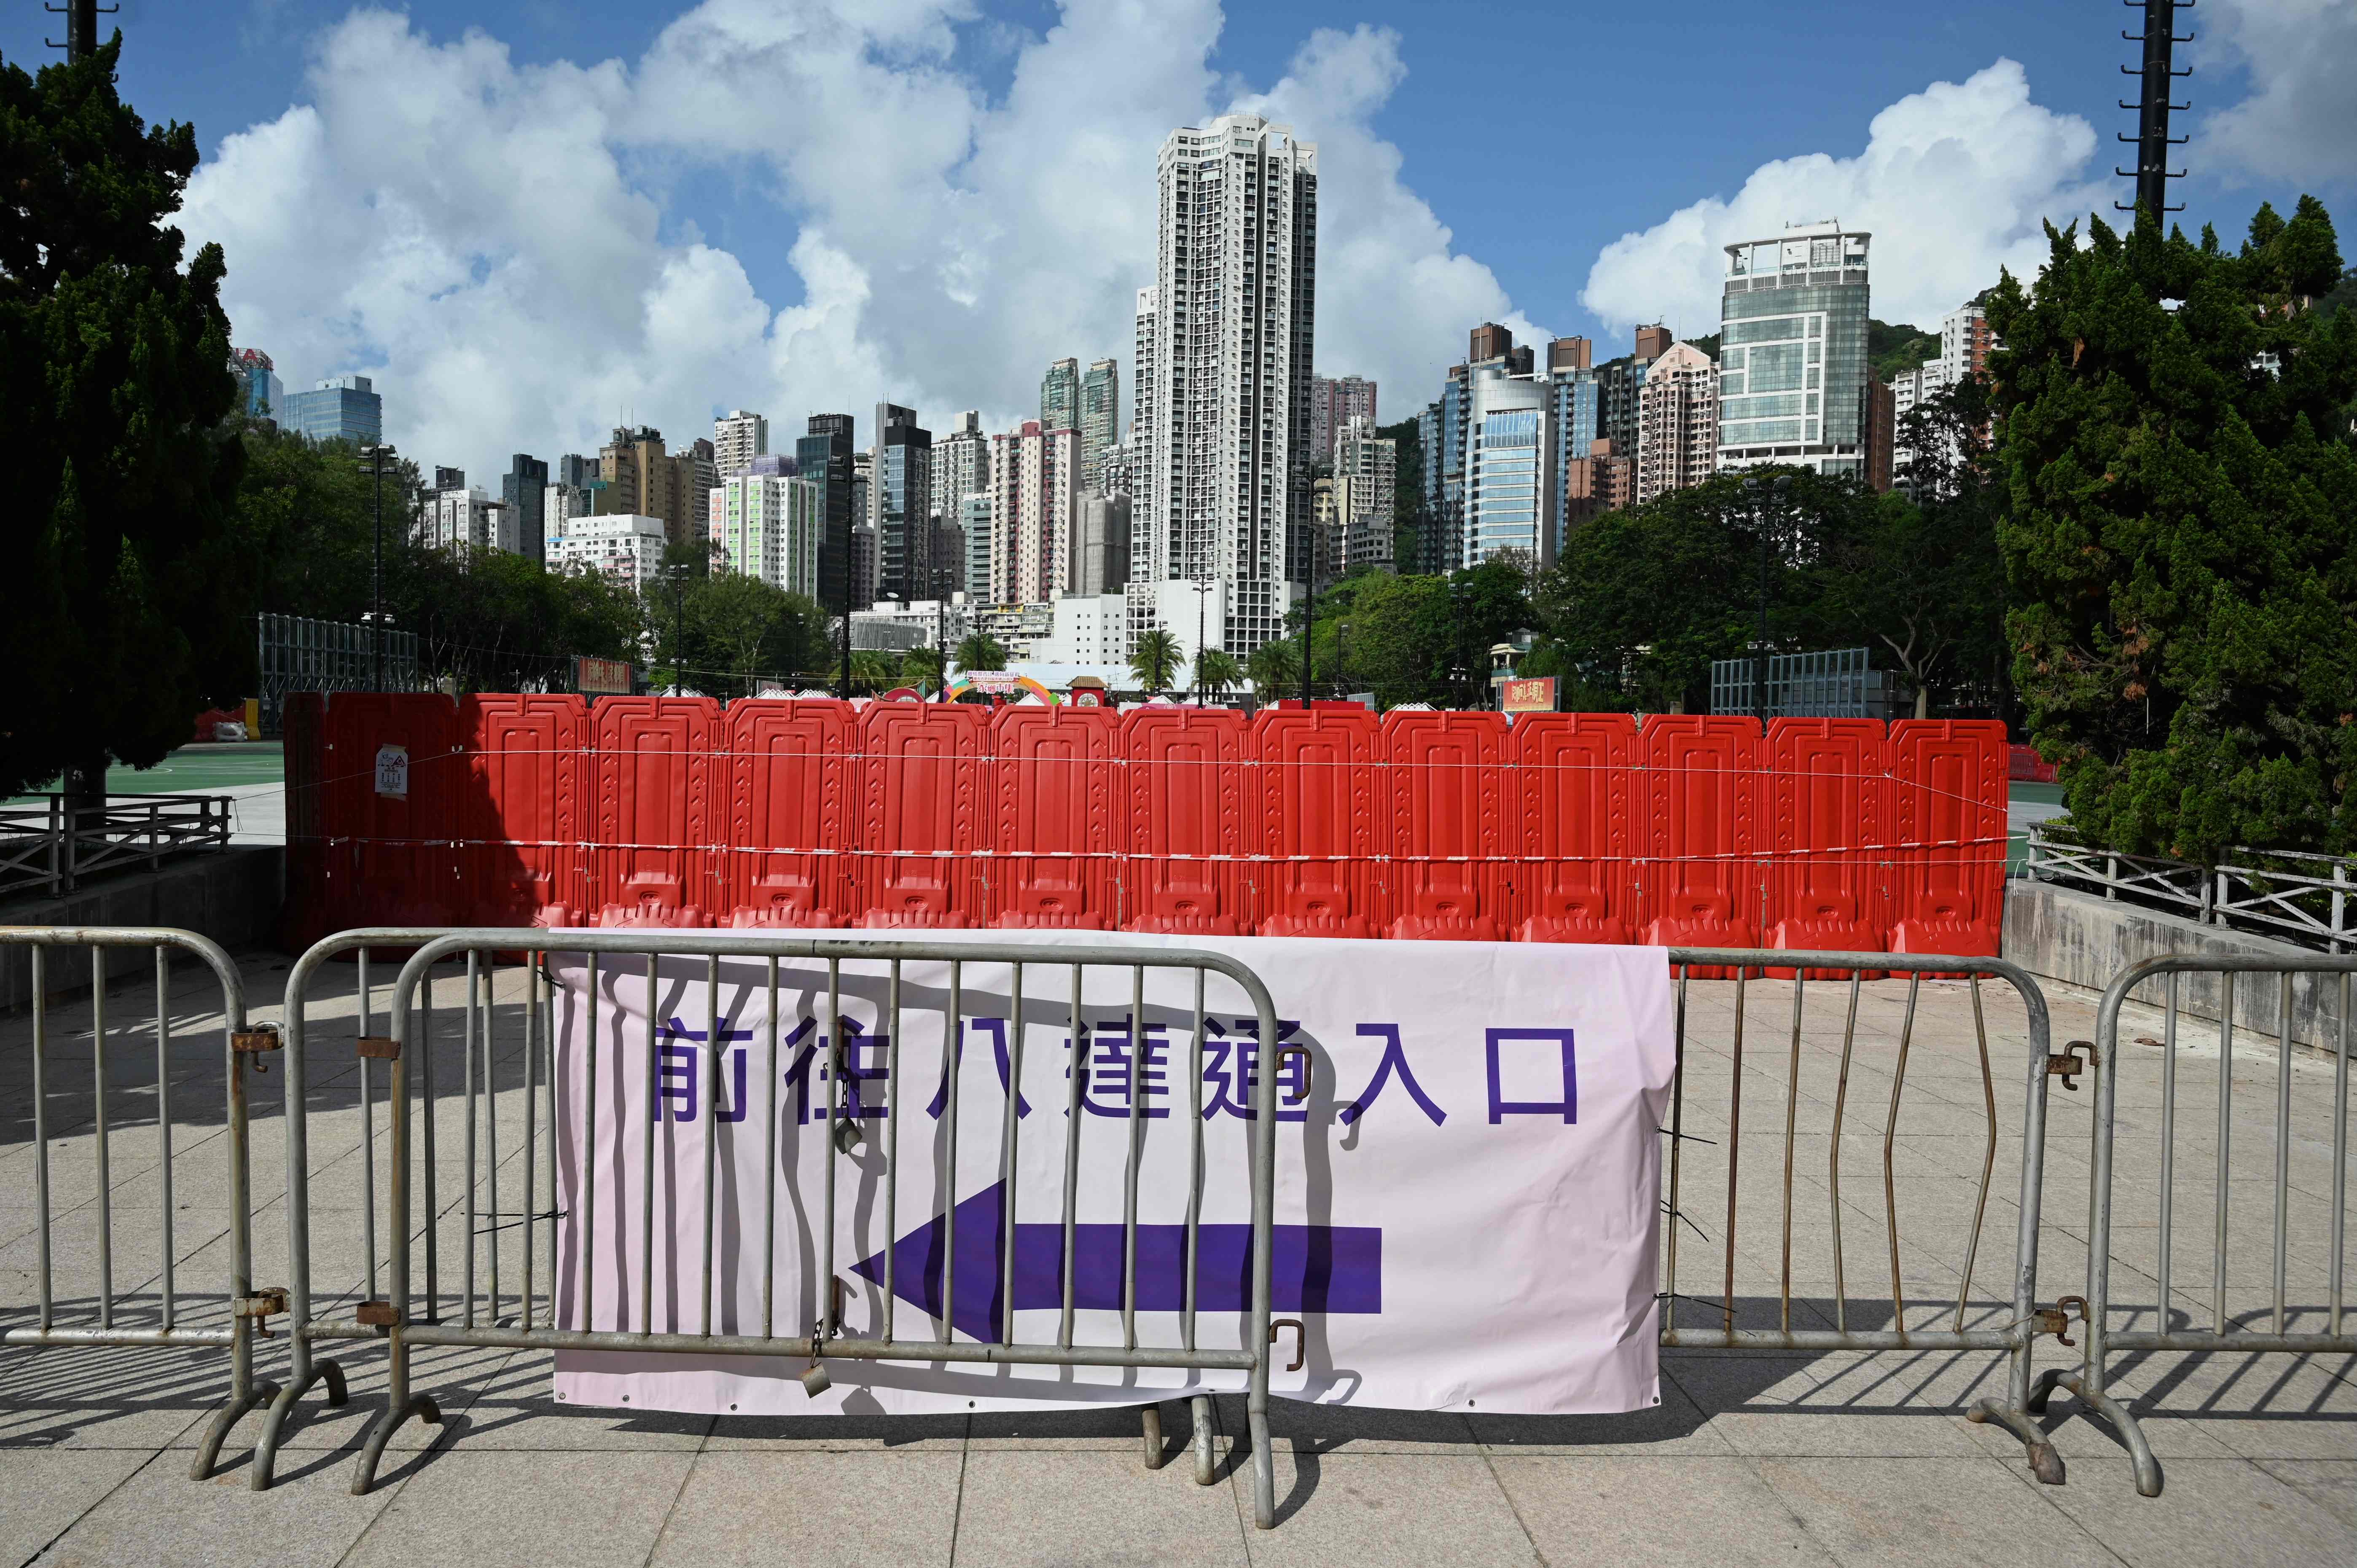 Discussion of the seven weeks of student-led protests that attracted workers and artists and their violent resolution has long been suppressed in China. It also became increasingly off-limits in Hong Kong since a sweeping national security law was imposed in June 2020, effectively barring anyone from holding memorial events.